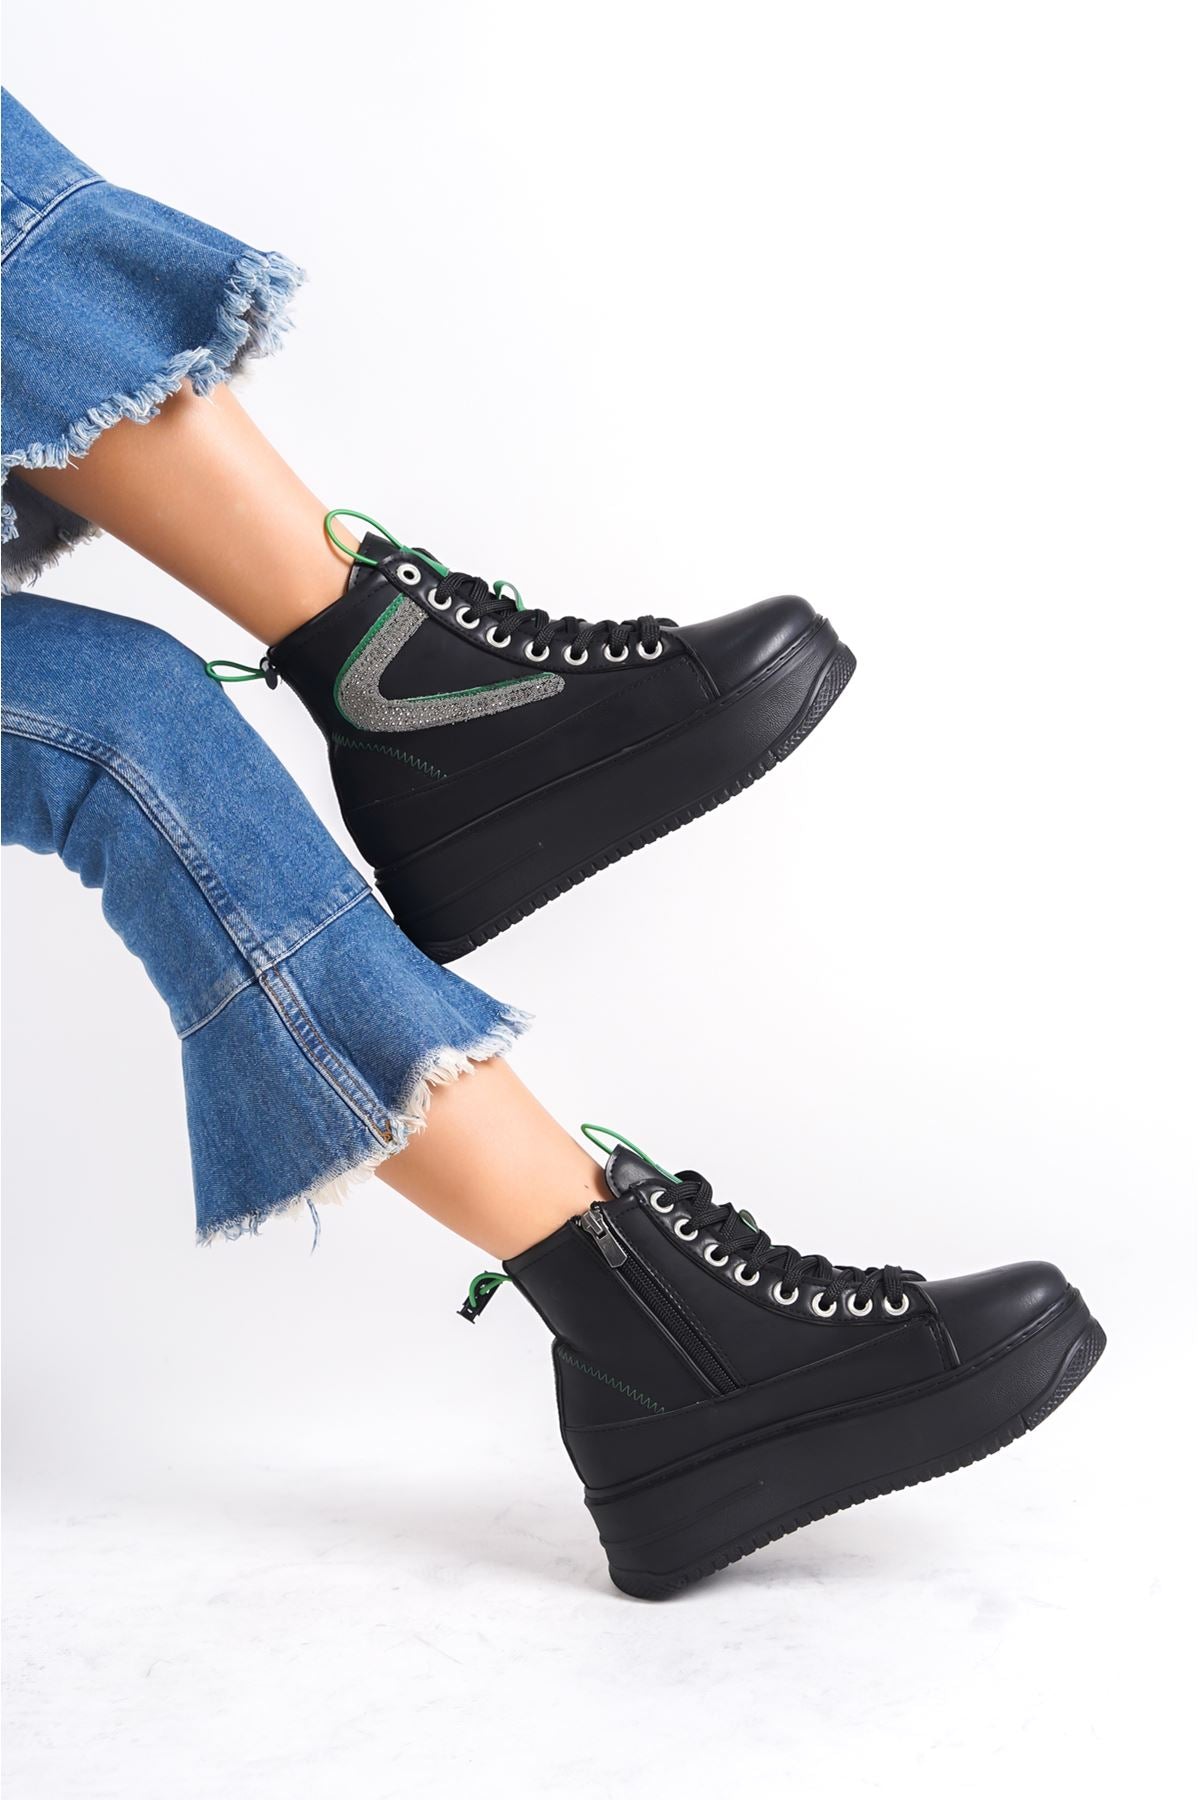 Women's Black Thick Soled Sports Boots with Green Detail - STREETMODE ™